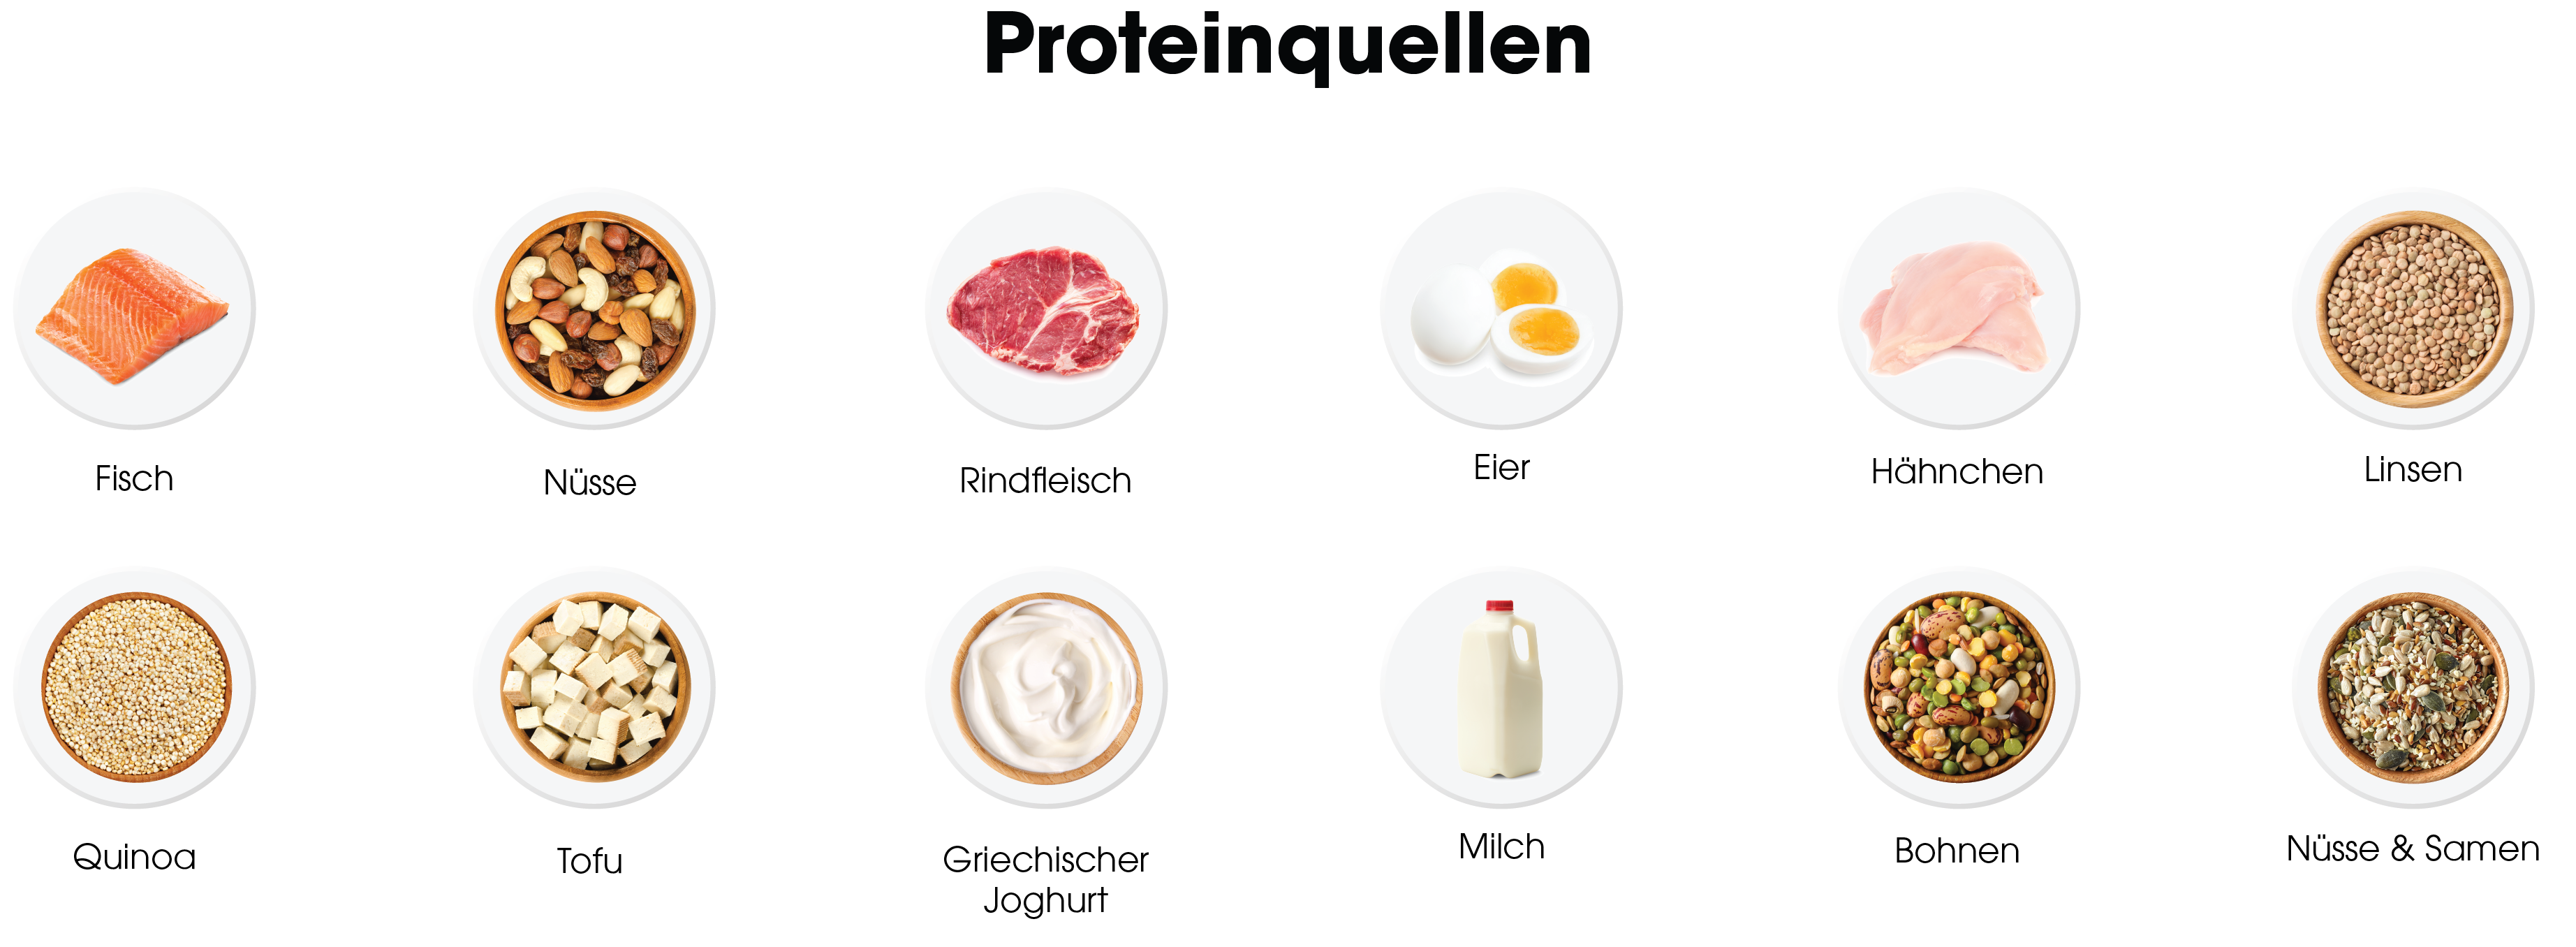 Sourced of protein